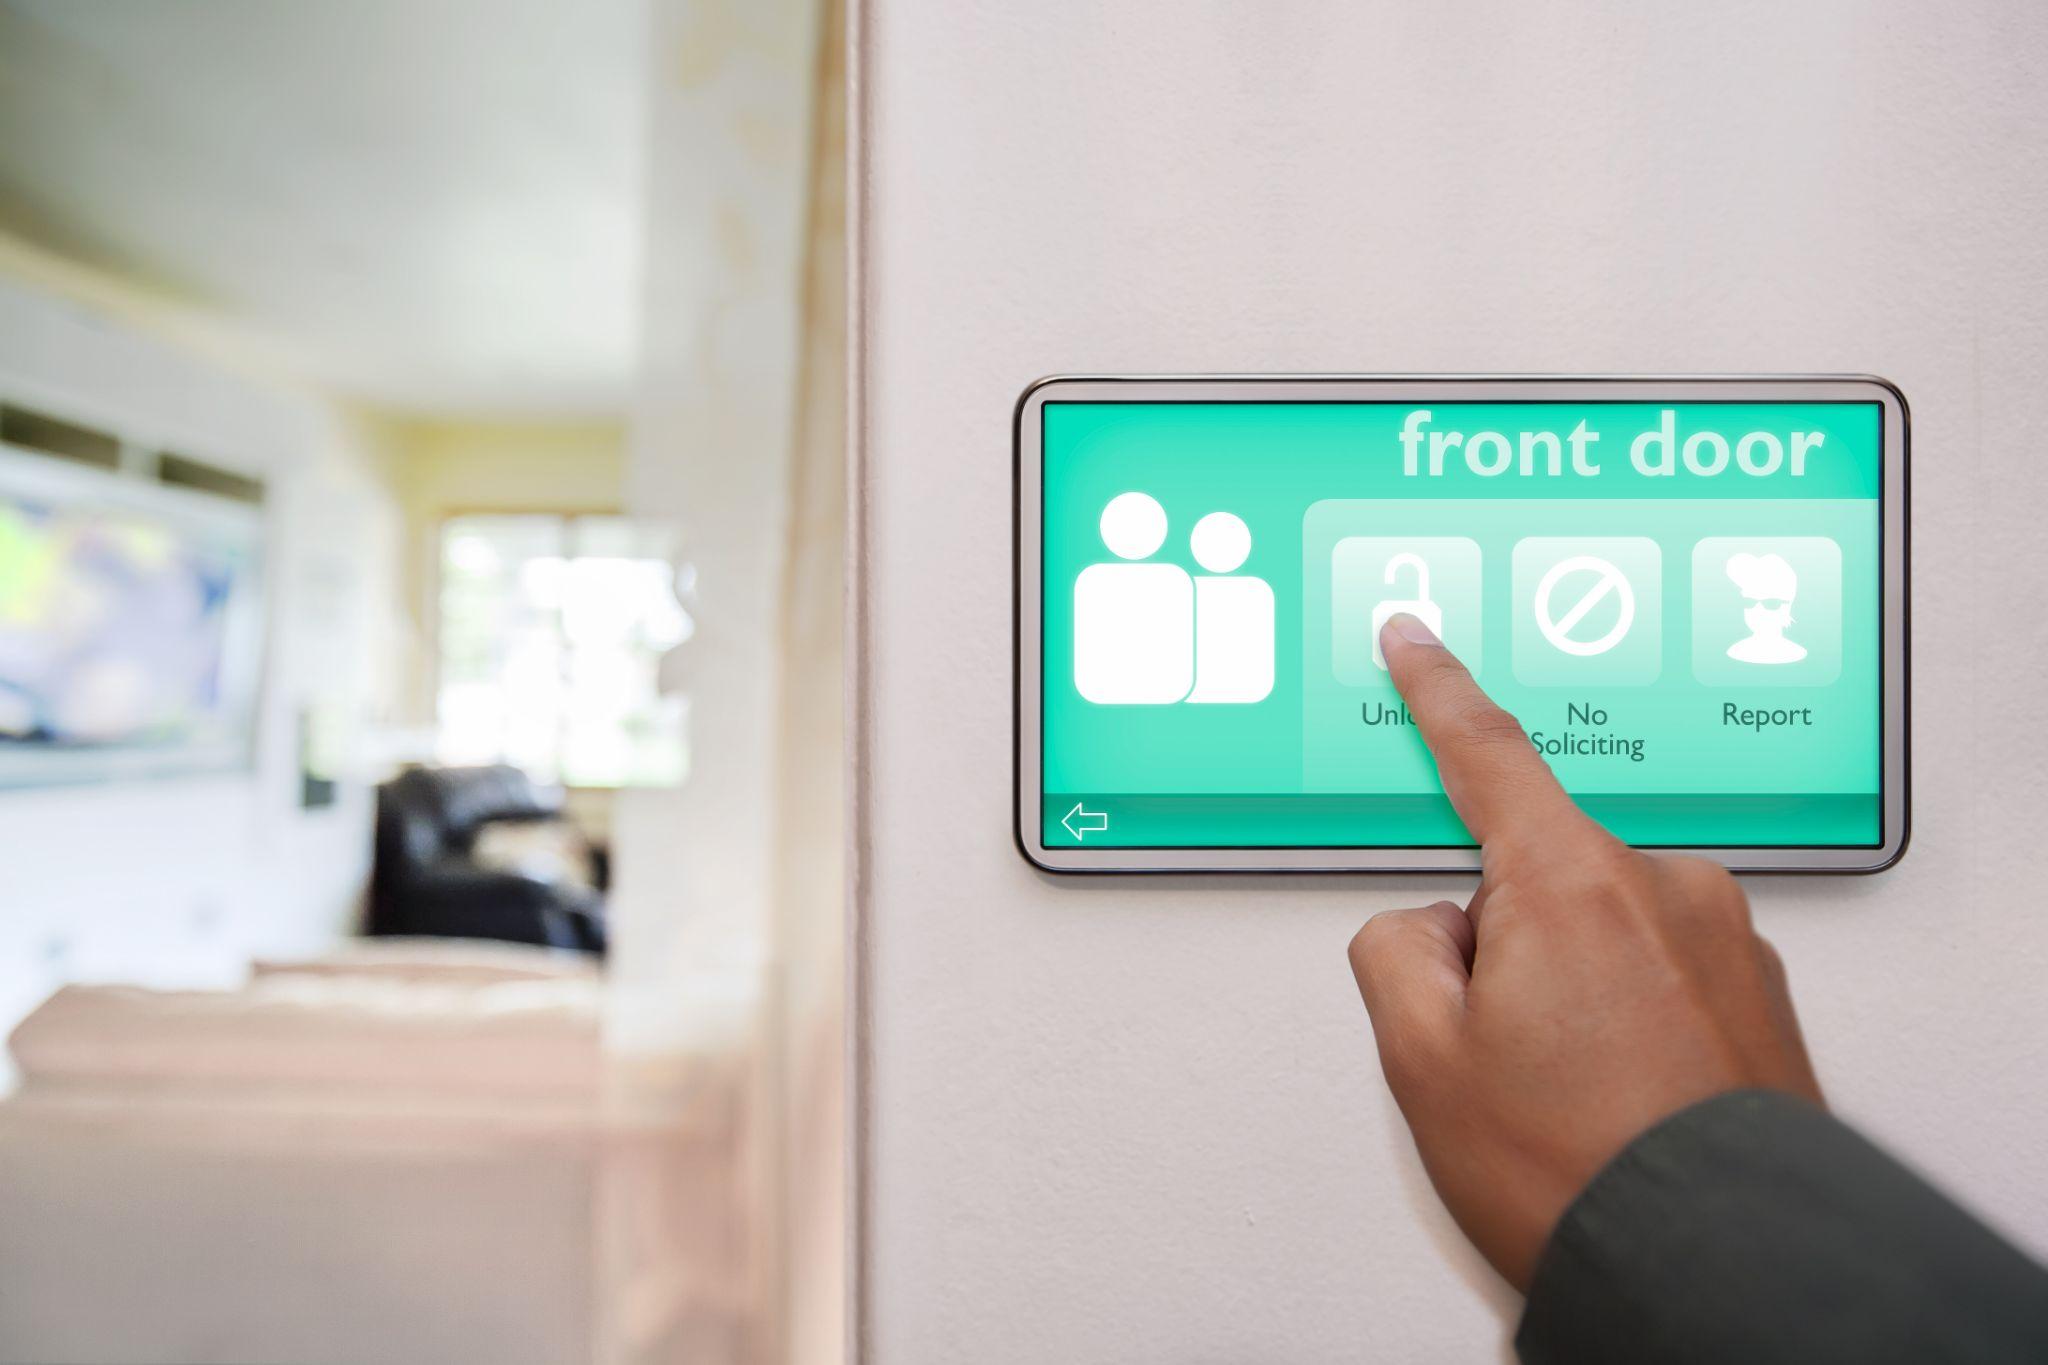 Home owner unlocking the front door of home, using a touchscreen device to control all the connected smart home features.